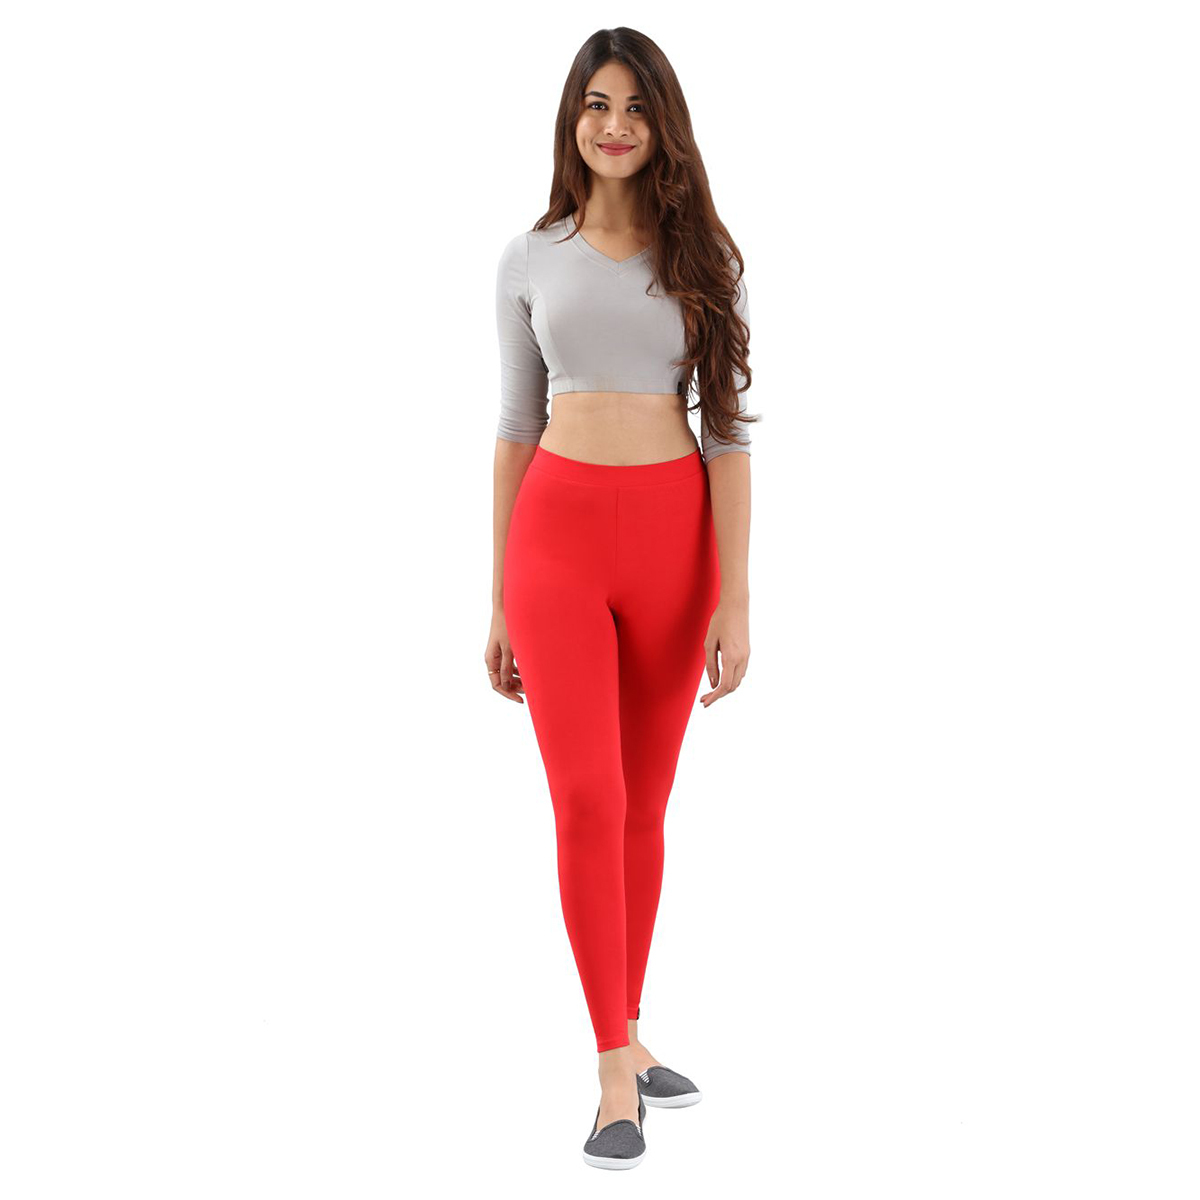 Twin Birds Women Solid Colour Viscose Ankle Length Legging with Signature Wide Waistband - Tomato Red